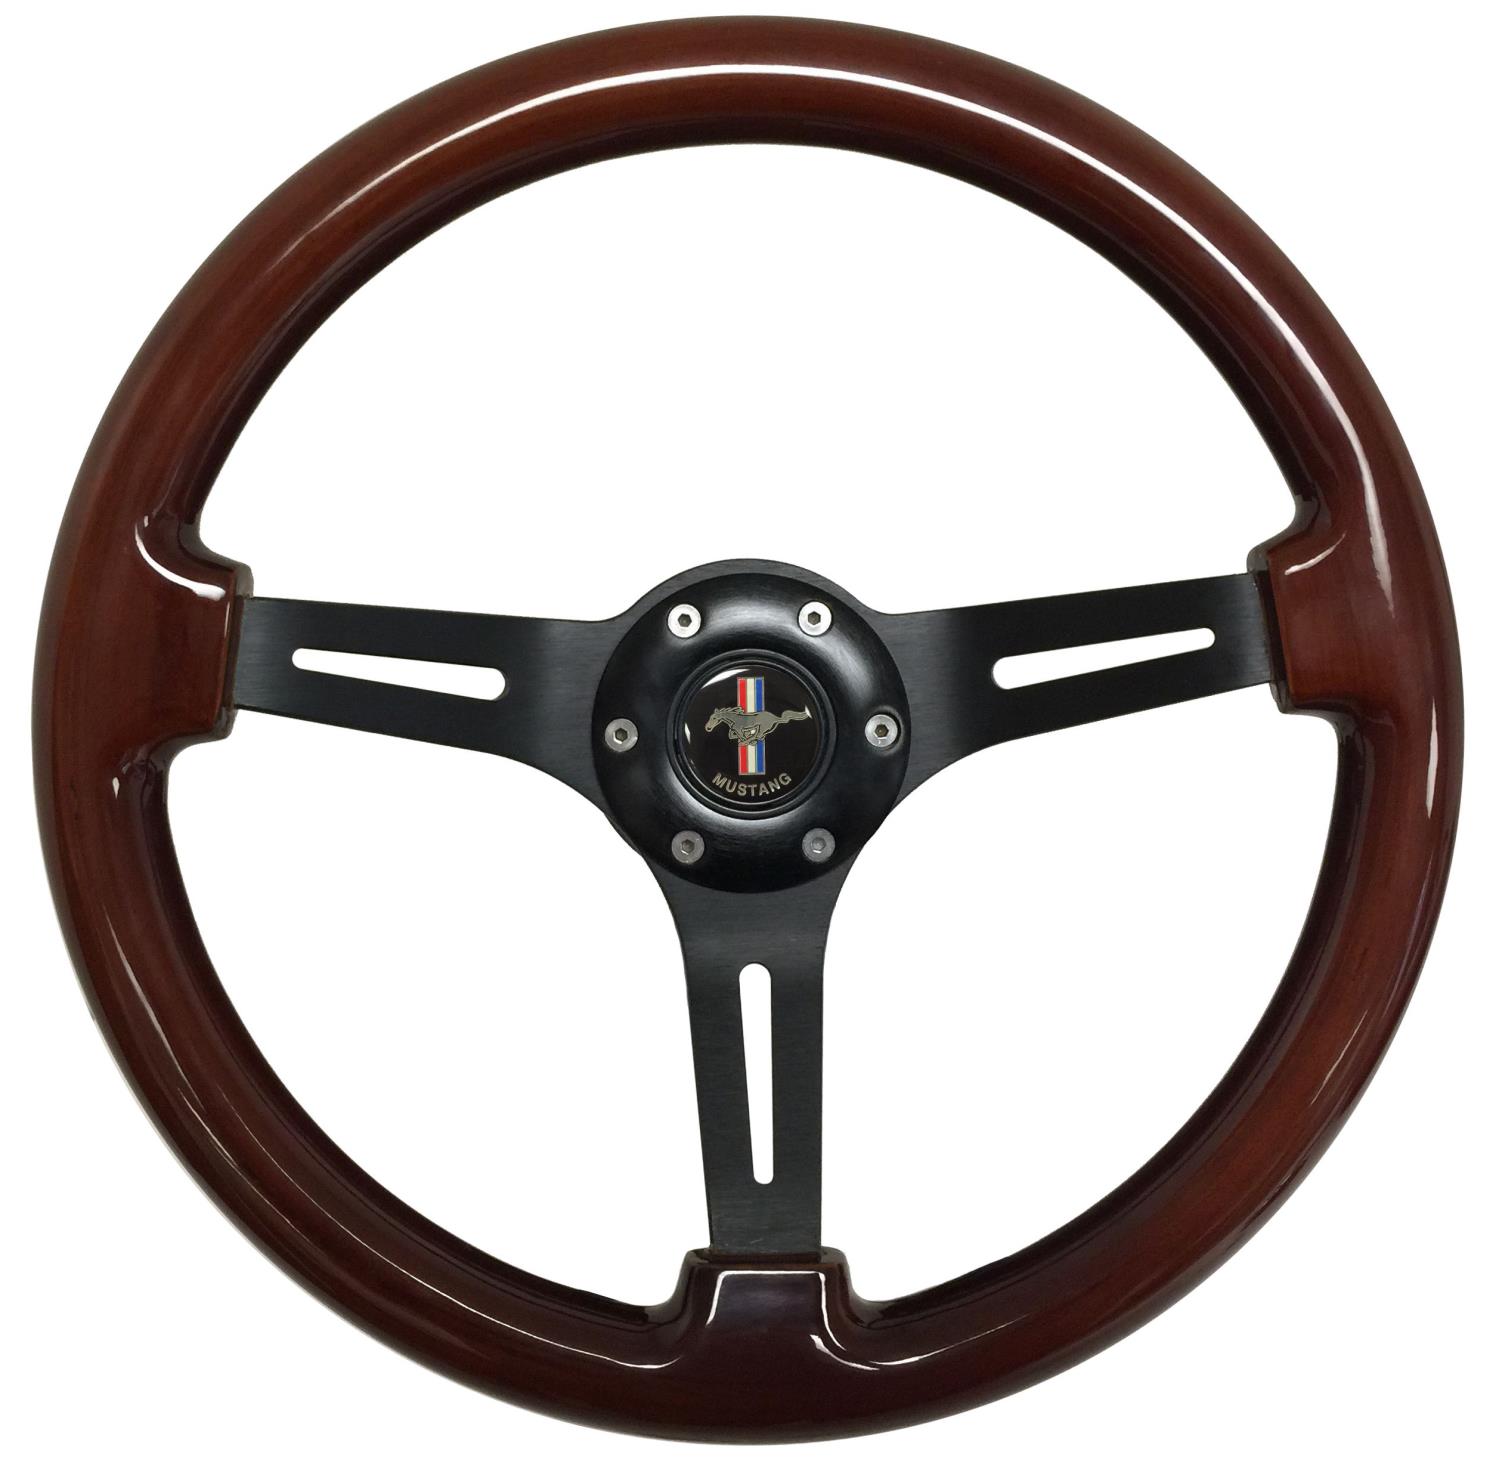 S6 Sport Steering Wheel Kit for 1968-1973 Ford/Mercury, 14 in. Diameter, Mahogany Wood Grip, with 6-Bolt Adapter and Horn Button